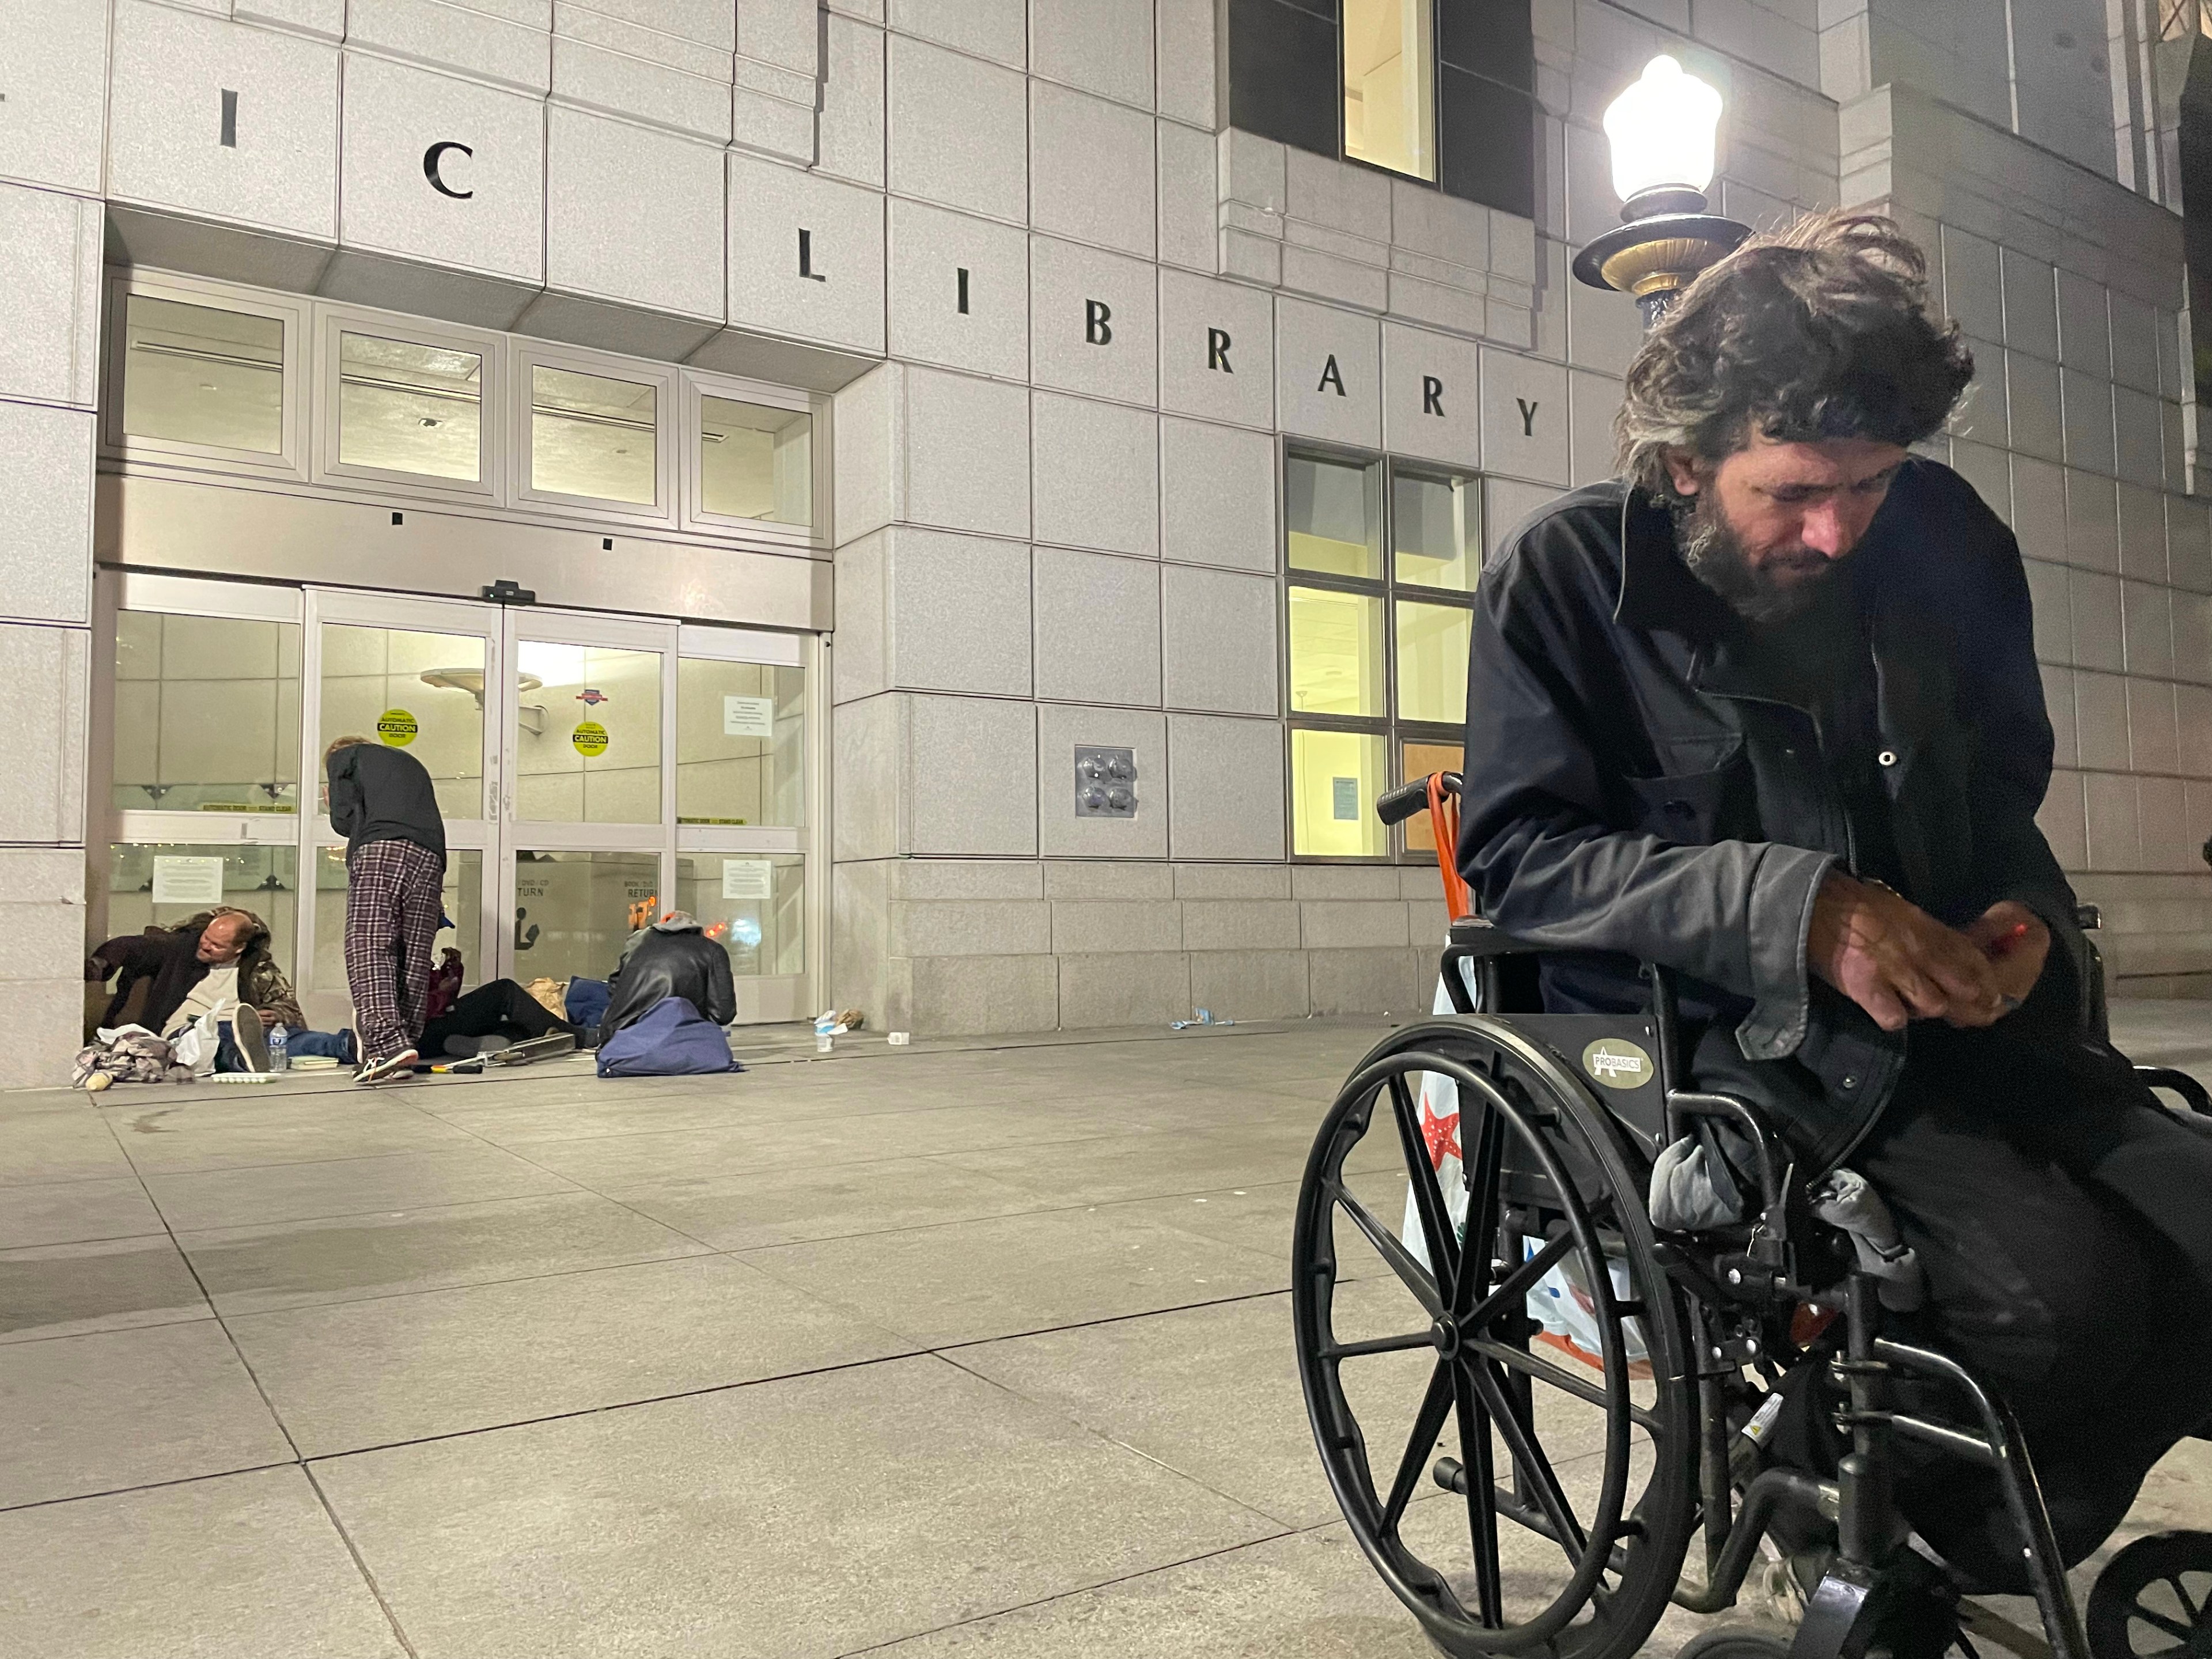 A man in a wheelchair and others sit outside a building labeled &quot;LIBRARY&quot; at night, suggesting urban homelessness.